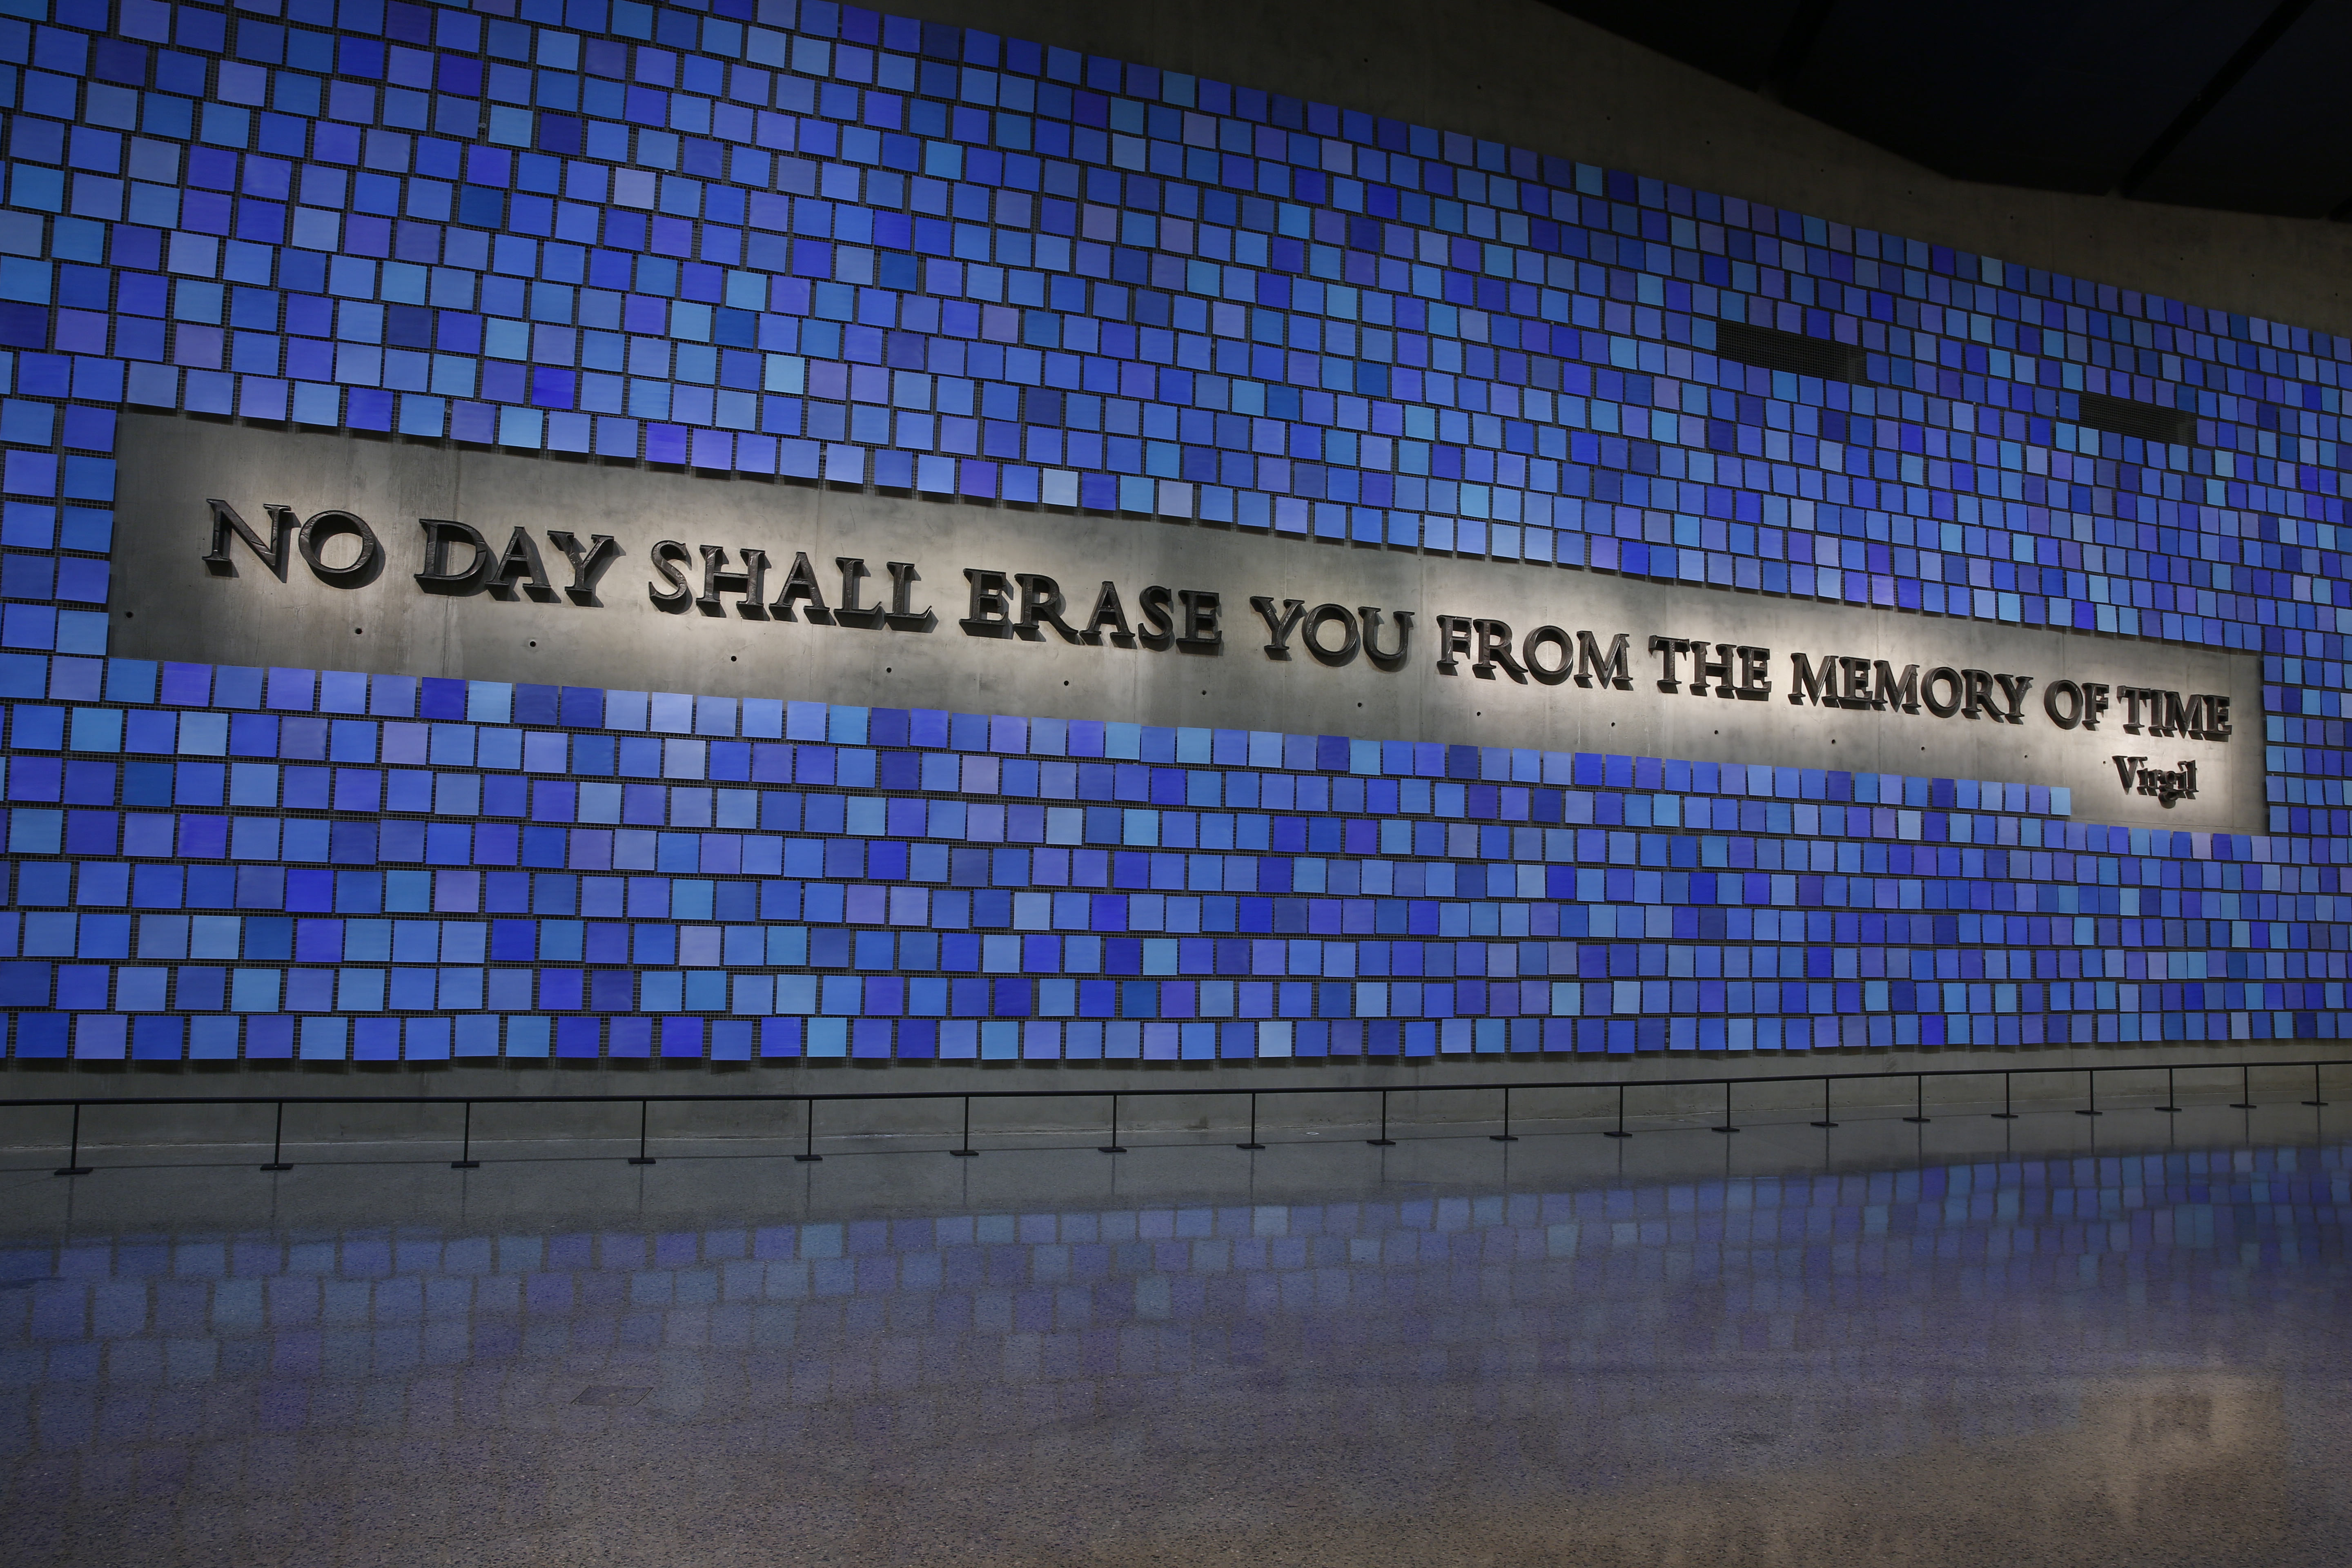 Artist Spencer Finch’s art installation “Trying to Remember the Color of the Sky on That September Morning” is seen illuminated at the 9/11 Memorial. It features Virgil quote “No day shall erase you from the memory of time.”